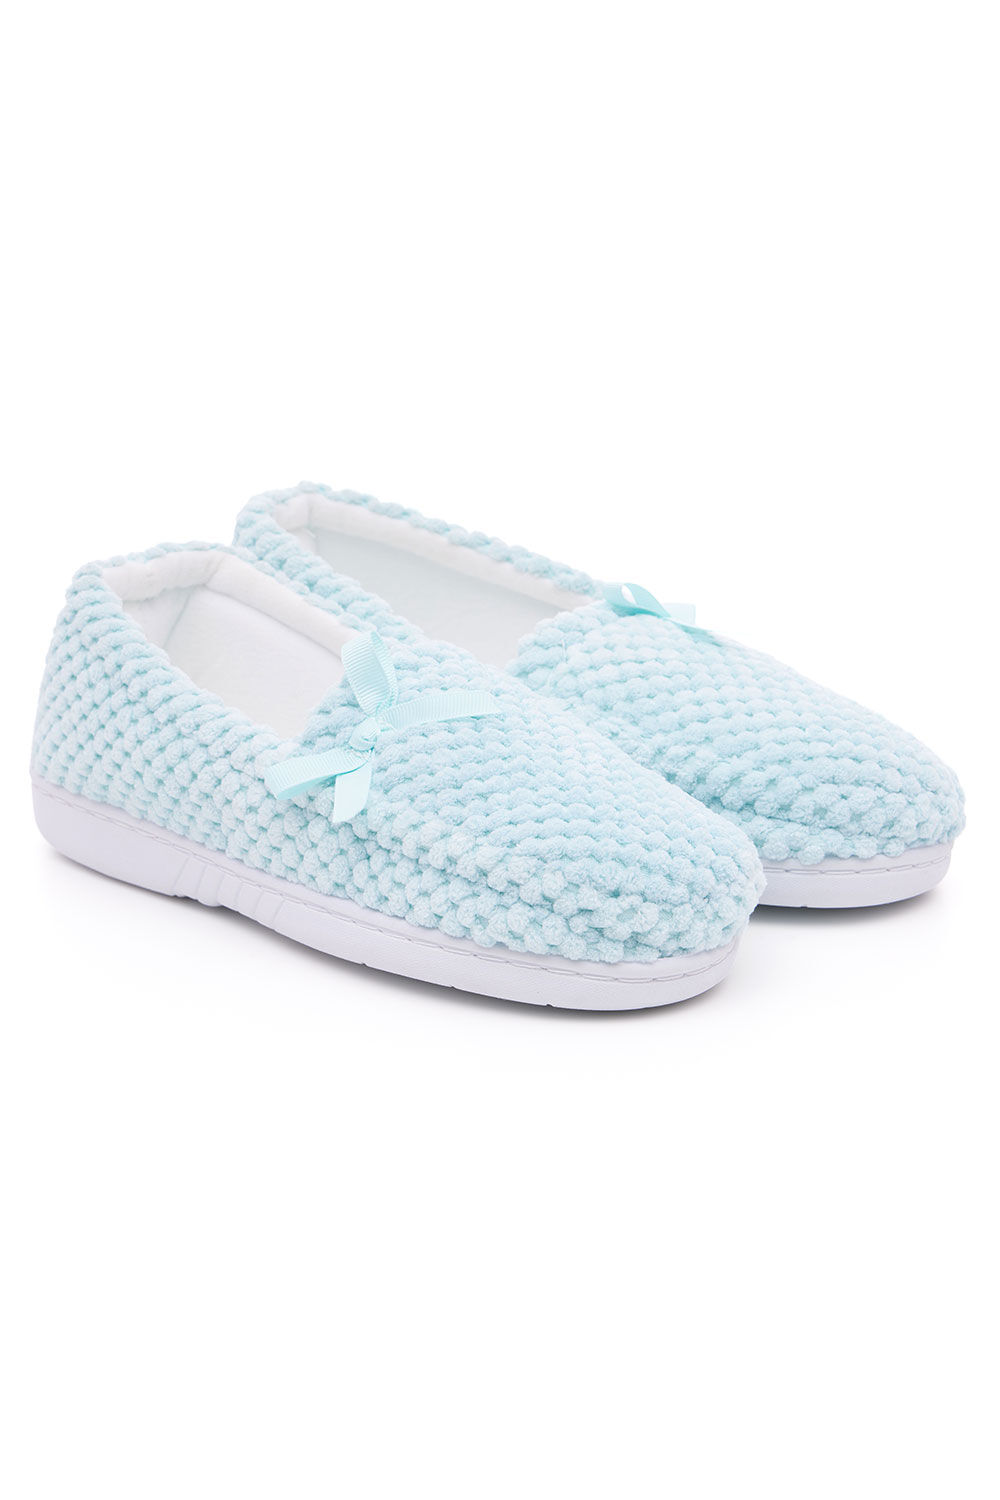 Bonmarche Blue Fleece Moccasin Slippers With Bow Detail, Size: 6